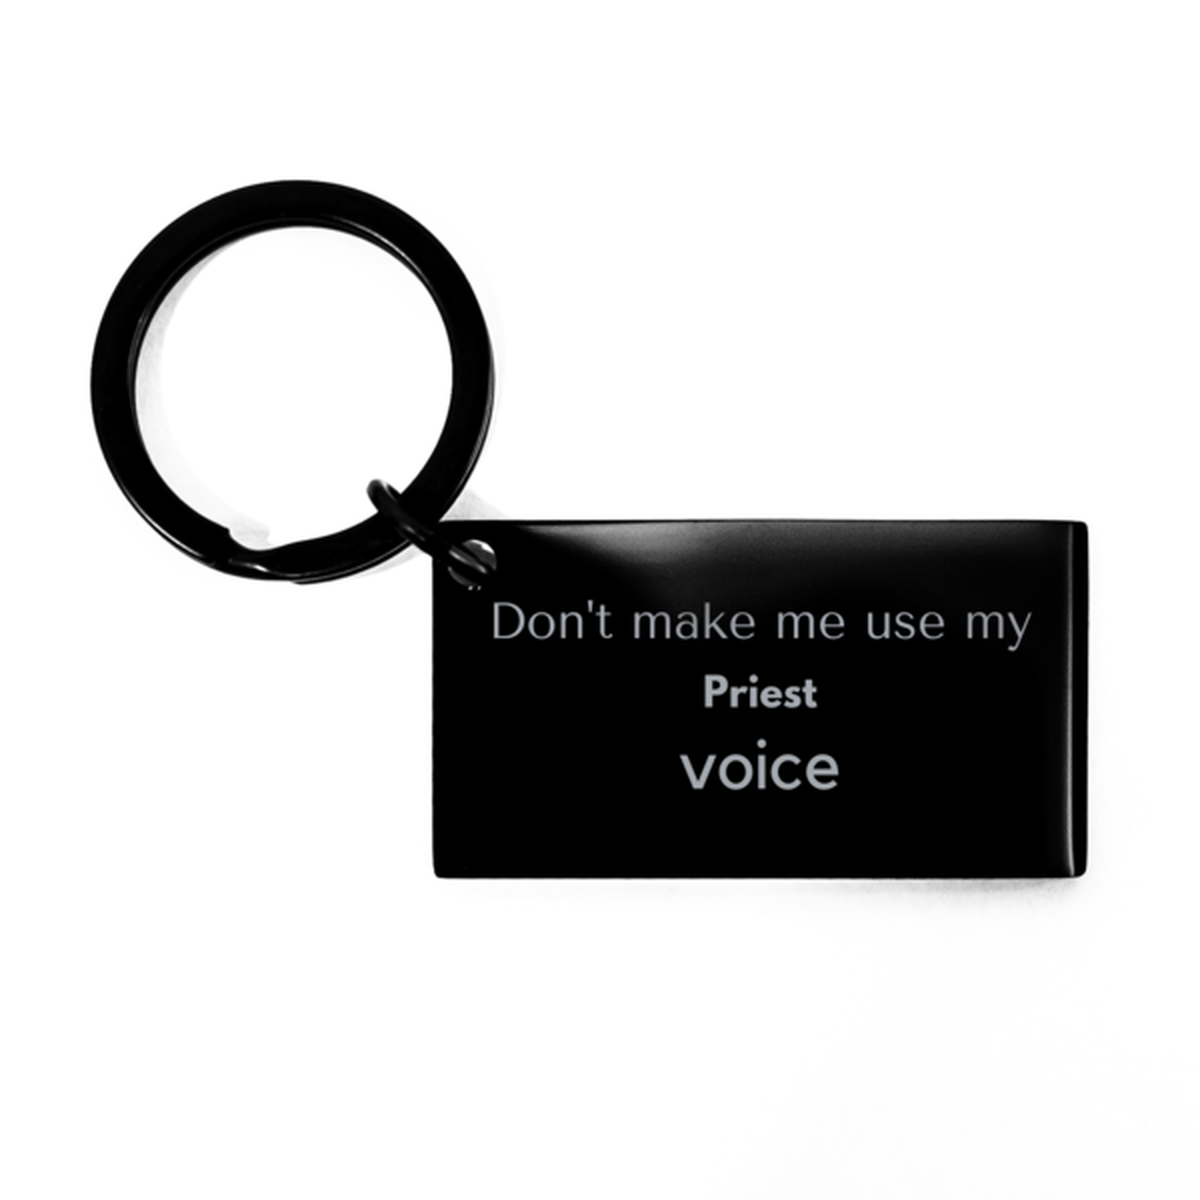 Don't make me use my Priest voice, Sarcasm Priest Gifts, Christmas Priest Keychain Birthday Unique Gifts For Priest Coworkers, Men, Women, Colleague, Friends